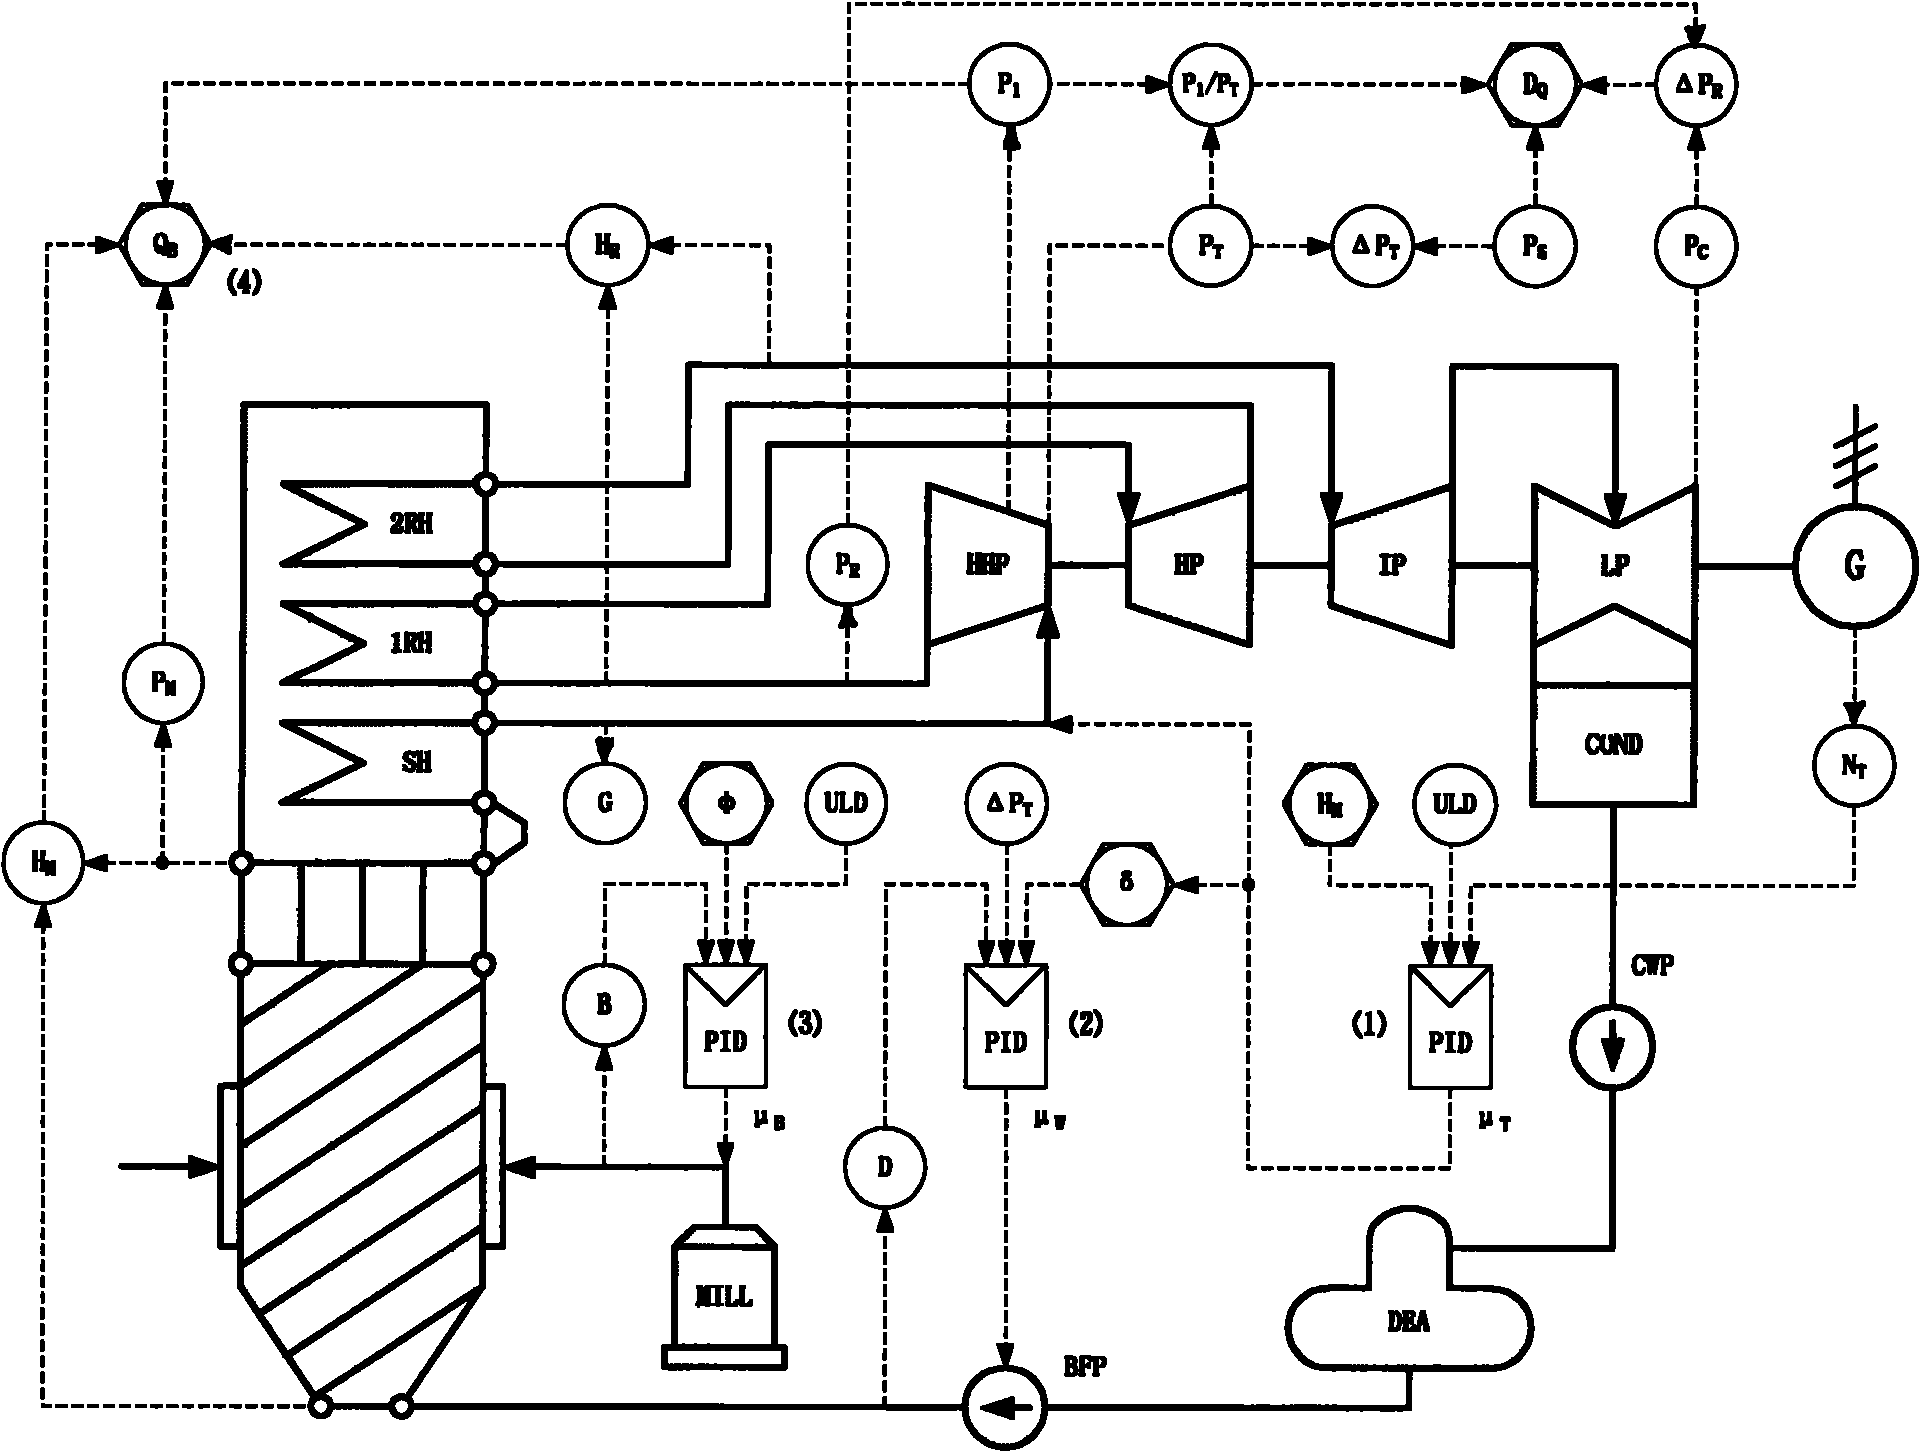 DBC (double direct energy and quality balance coordinated control system) of secondary reheating uniflow boiler-steam turbine